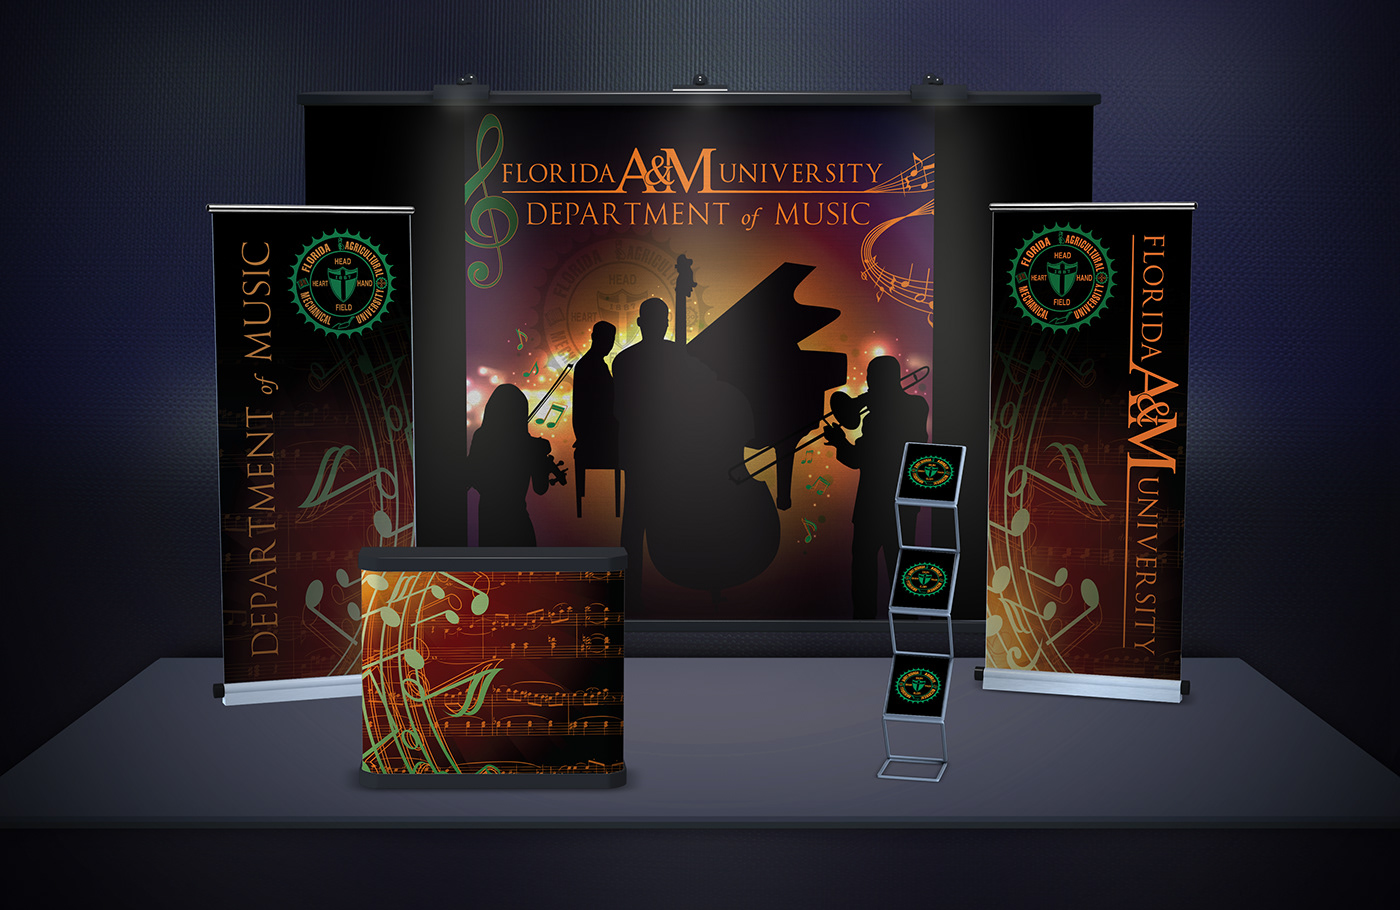 FAMU wanted to design a full event and marketing backdrop and some additional pop-up banners.